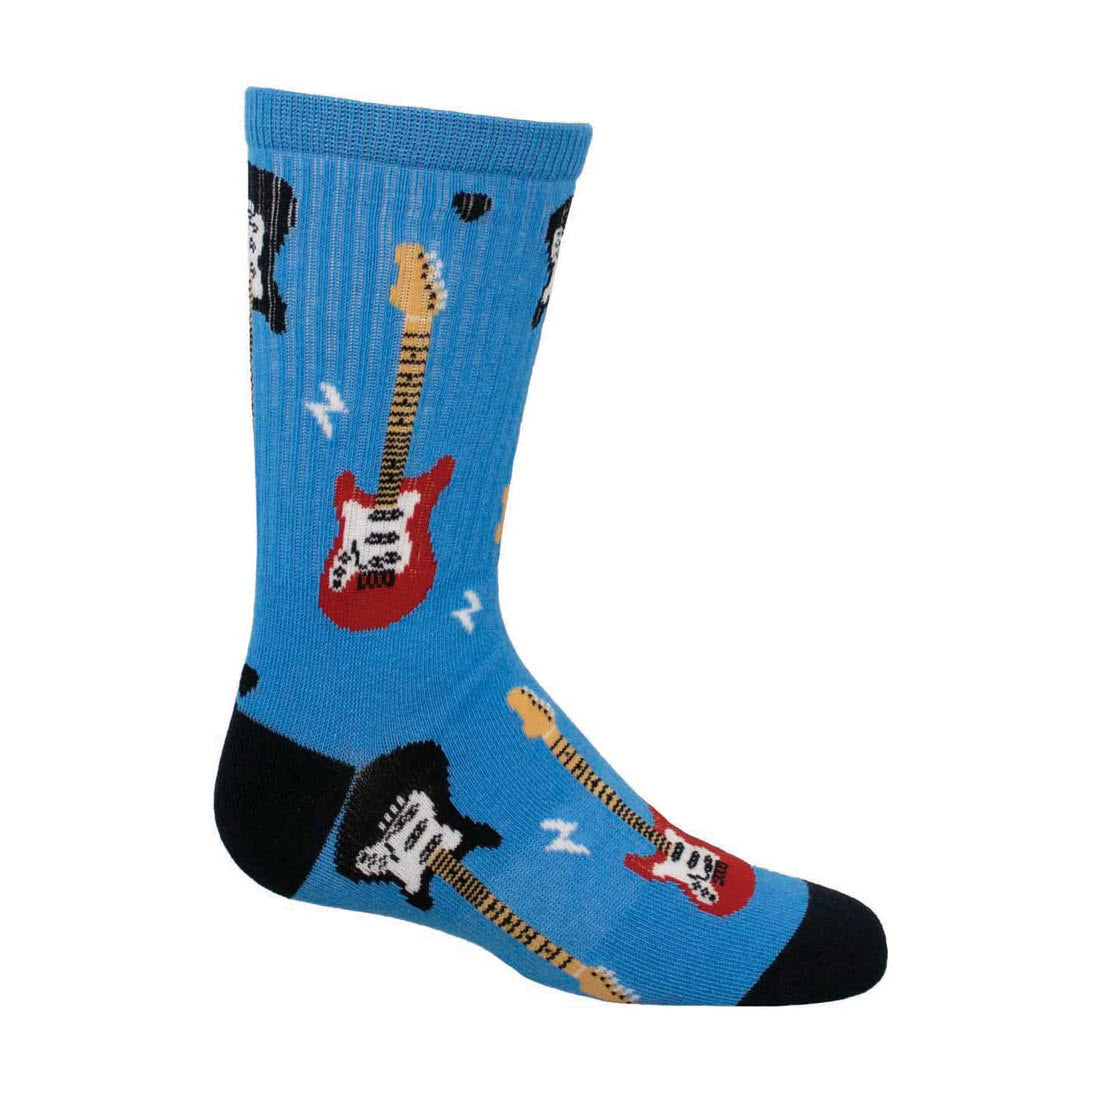 A single SOCKSMITH GUITAR SHREDDER CREW SOCKS BLUE - KIDS adorned with multiple colorful electric guitar illustrations, perfect for rocking out, featuring a black heel and toe.